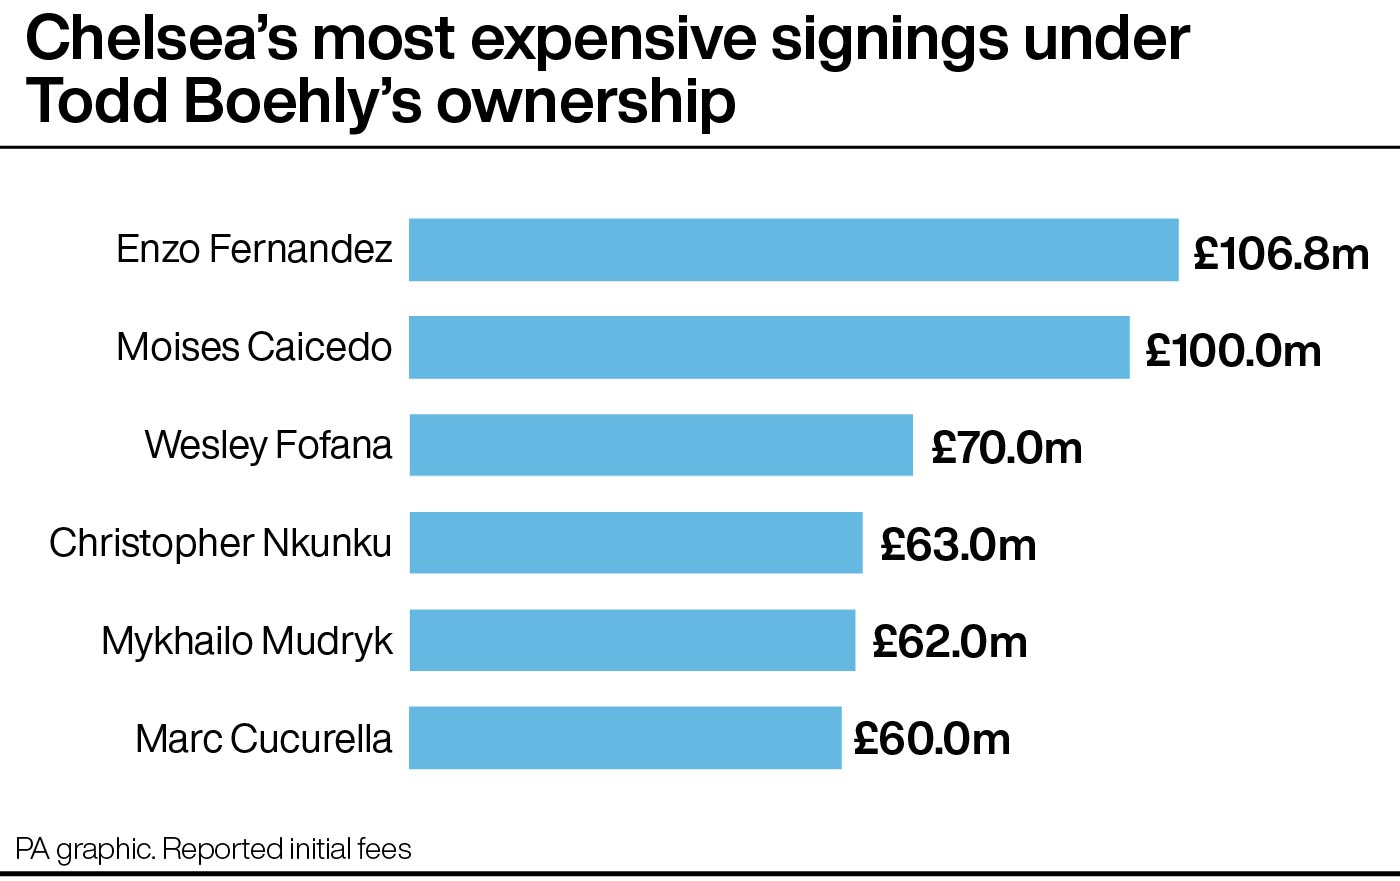 Chelsea's most expensive signings under Todd Boehly's ownership